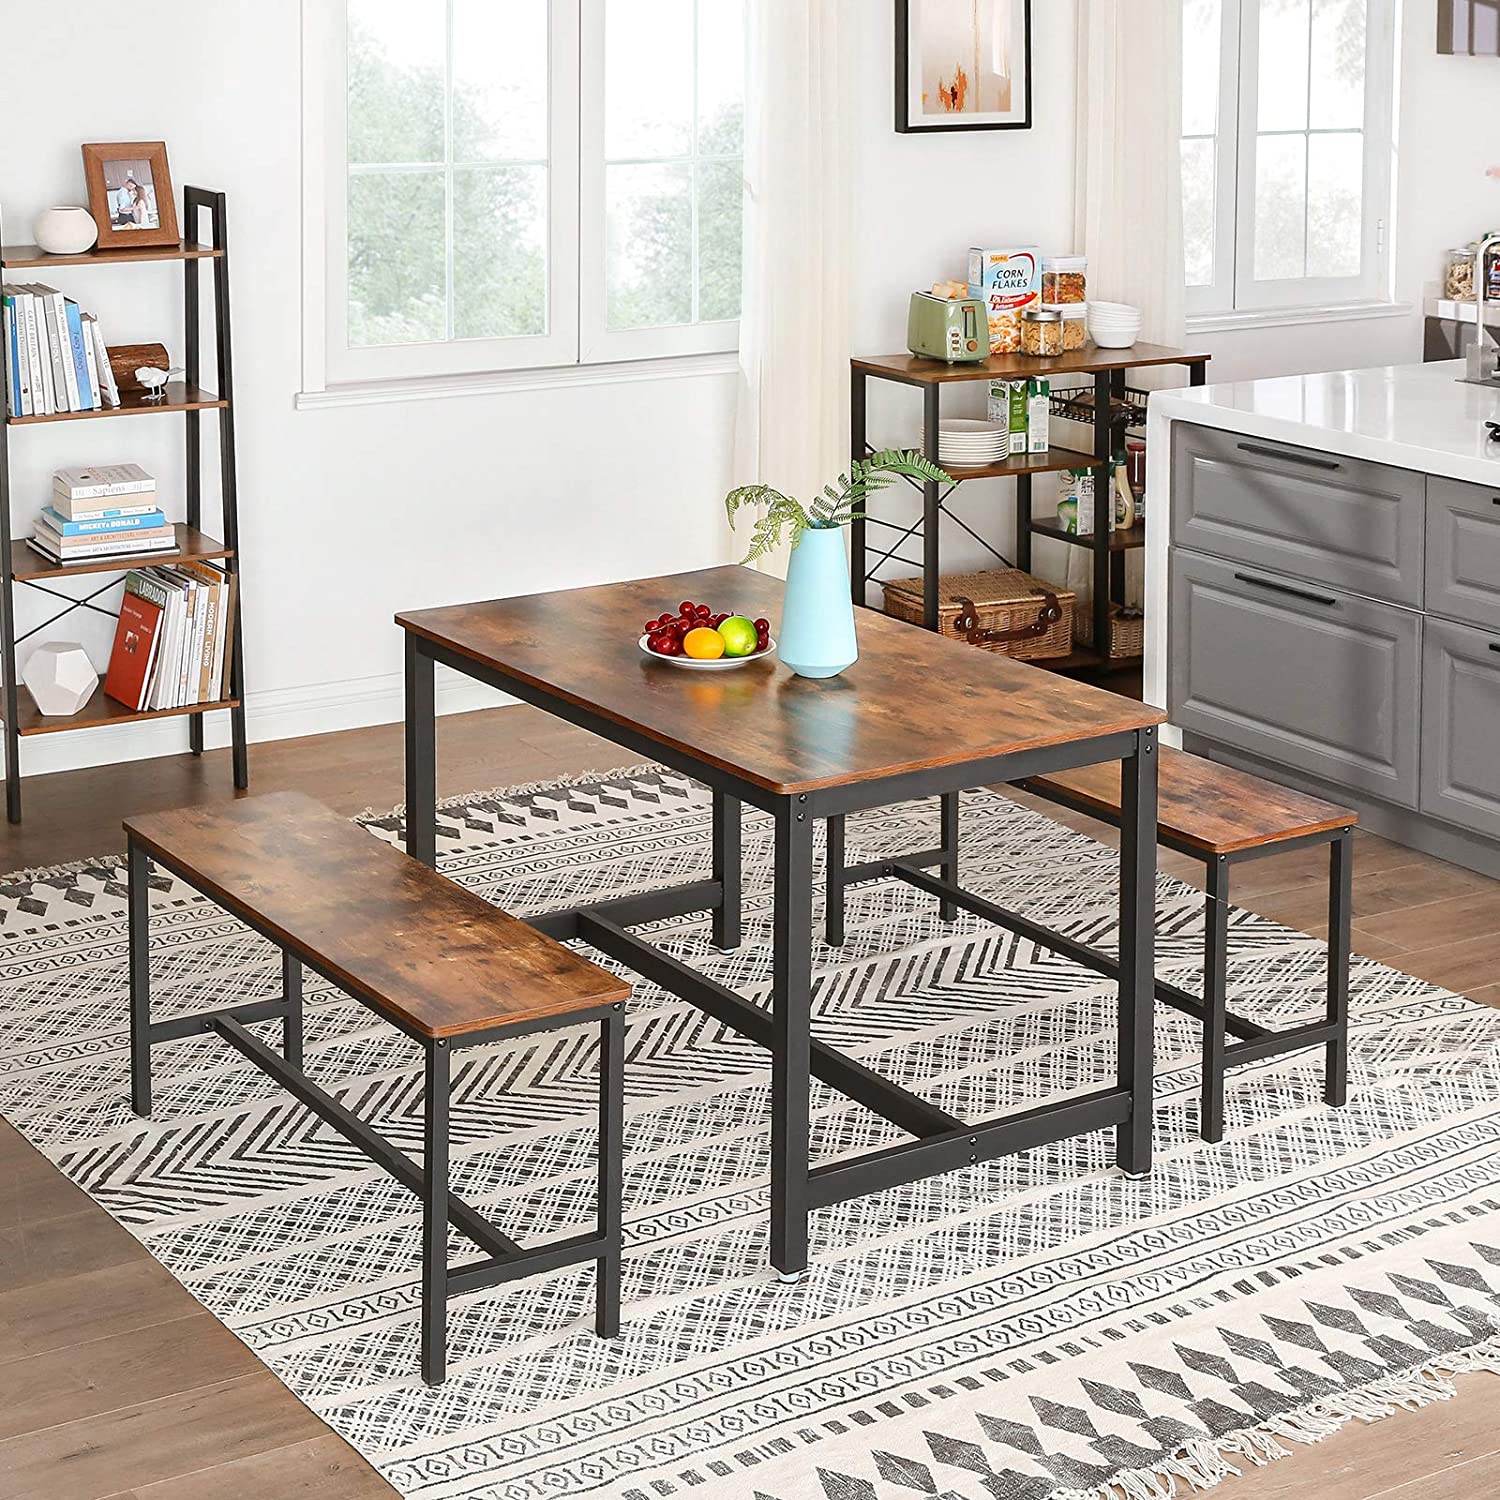 Nancy's Union Dining table for 4 people - Kitchen table - Industrial table - Dining room table - 120 x 75 x 75 cm